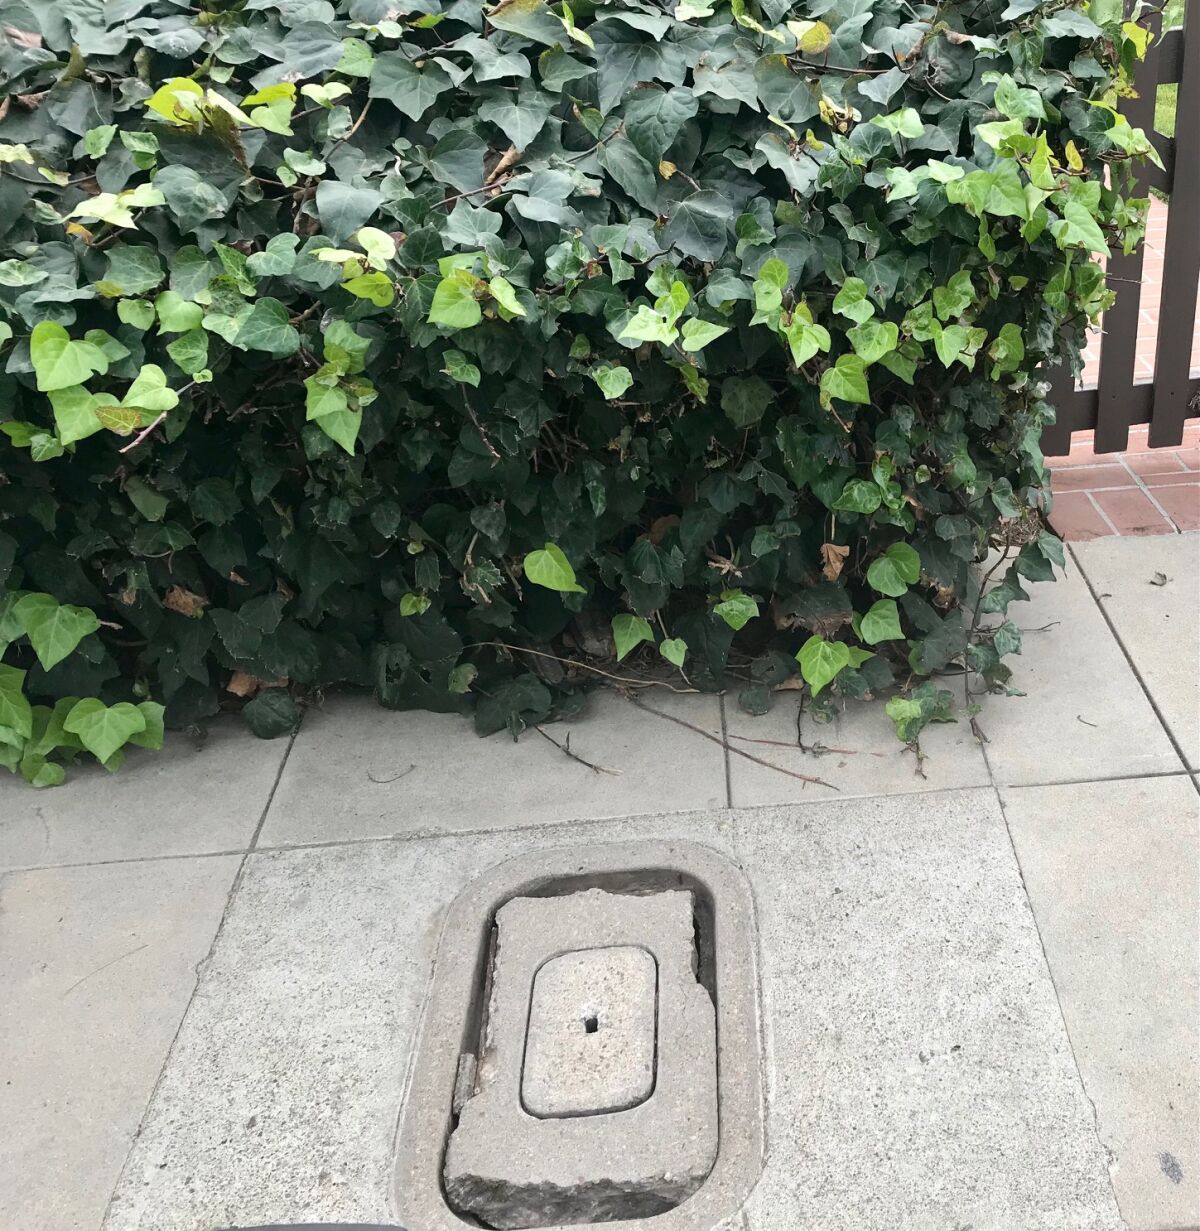 The crumbling water meter cover outside Inga's front gate was a broken ankle waiting to happen for people who walked on it.